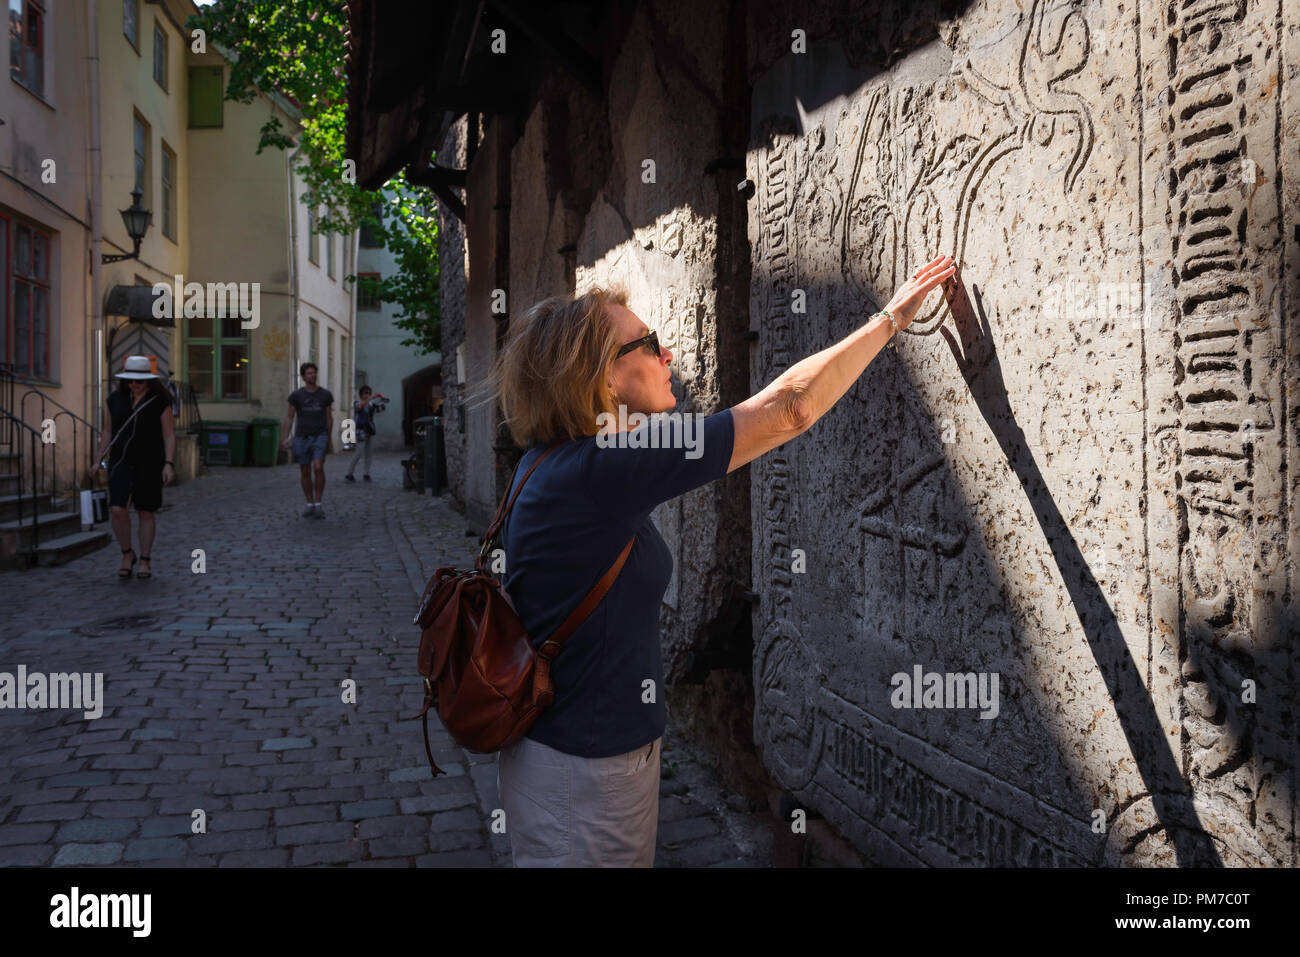 Woman travel explore, view of a mature female traveler touching a medieval tombstone in the historic Old Town (Vanalinn) area of Tallinn, Estonia. Stock Photo